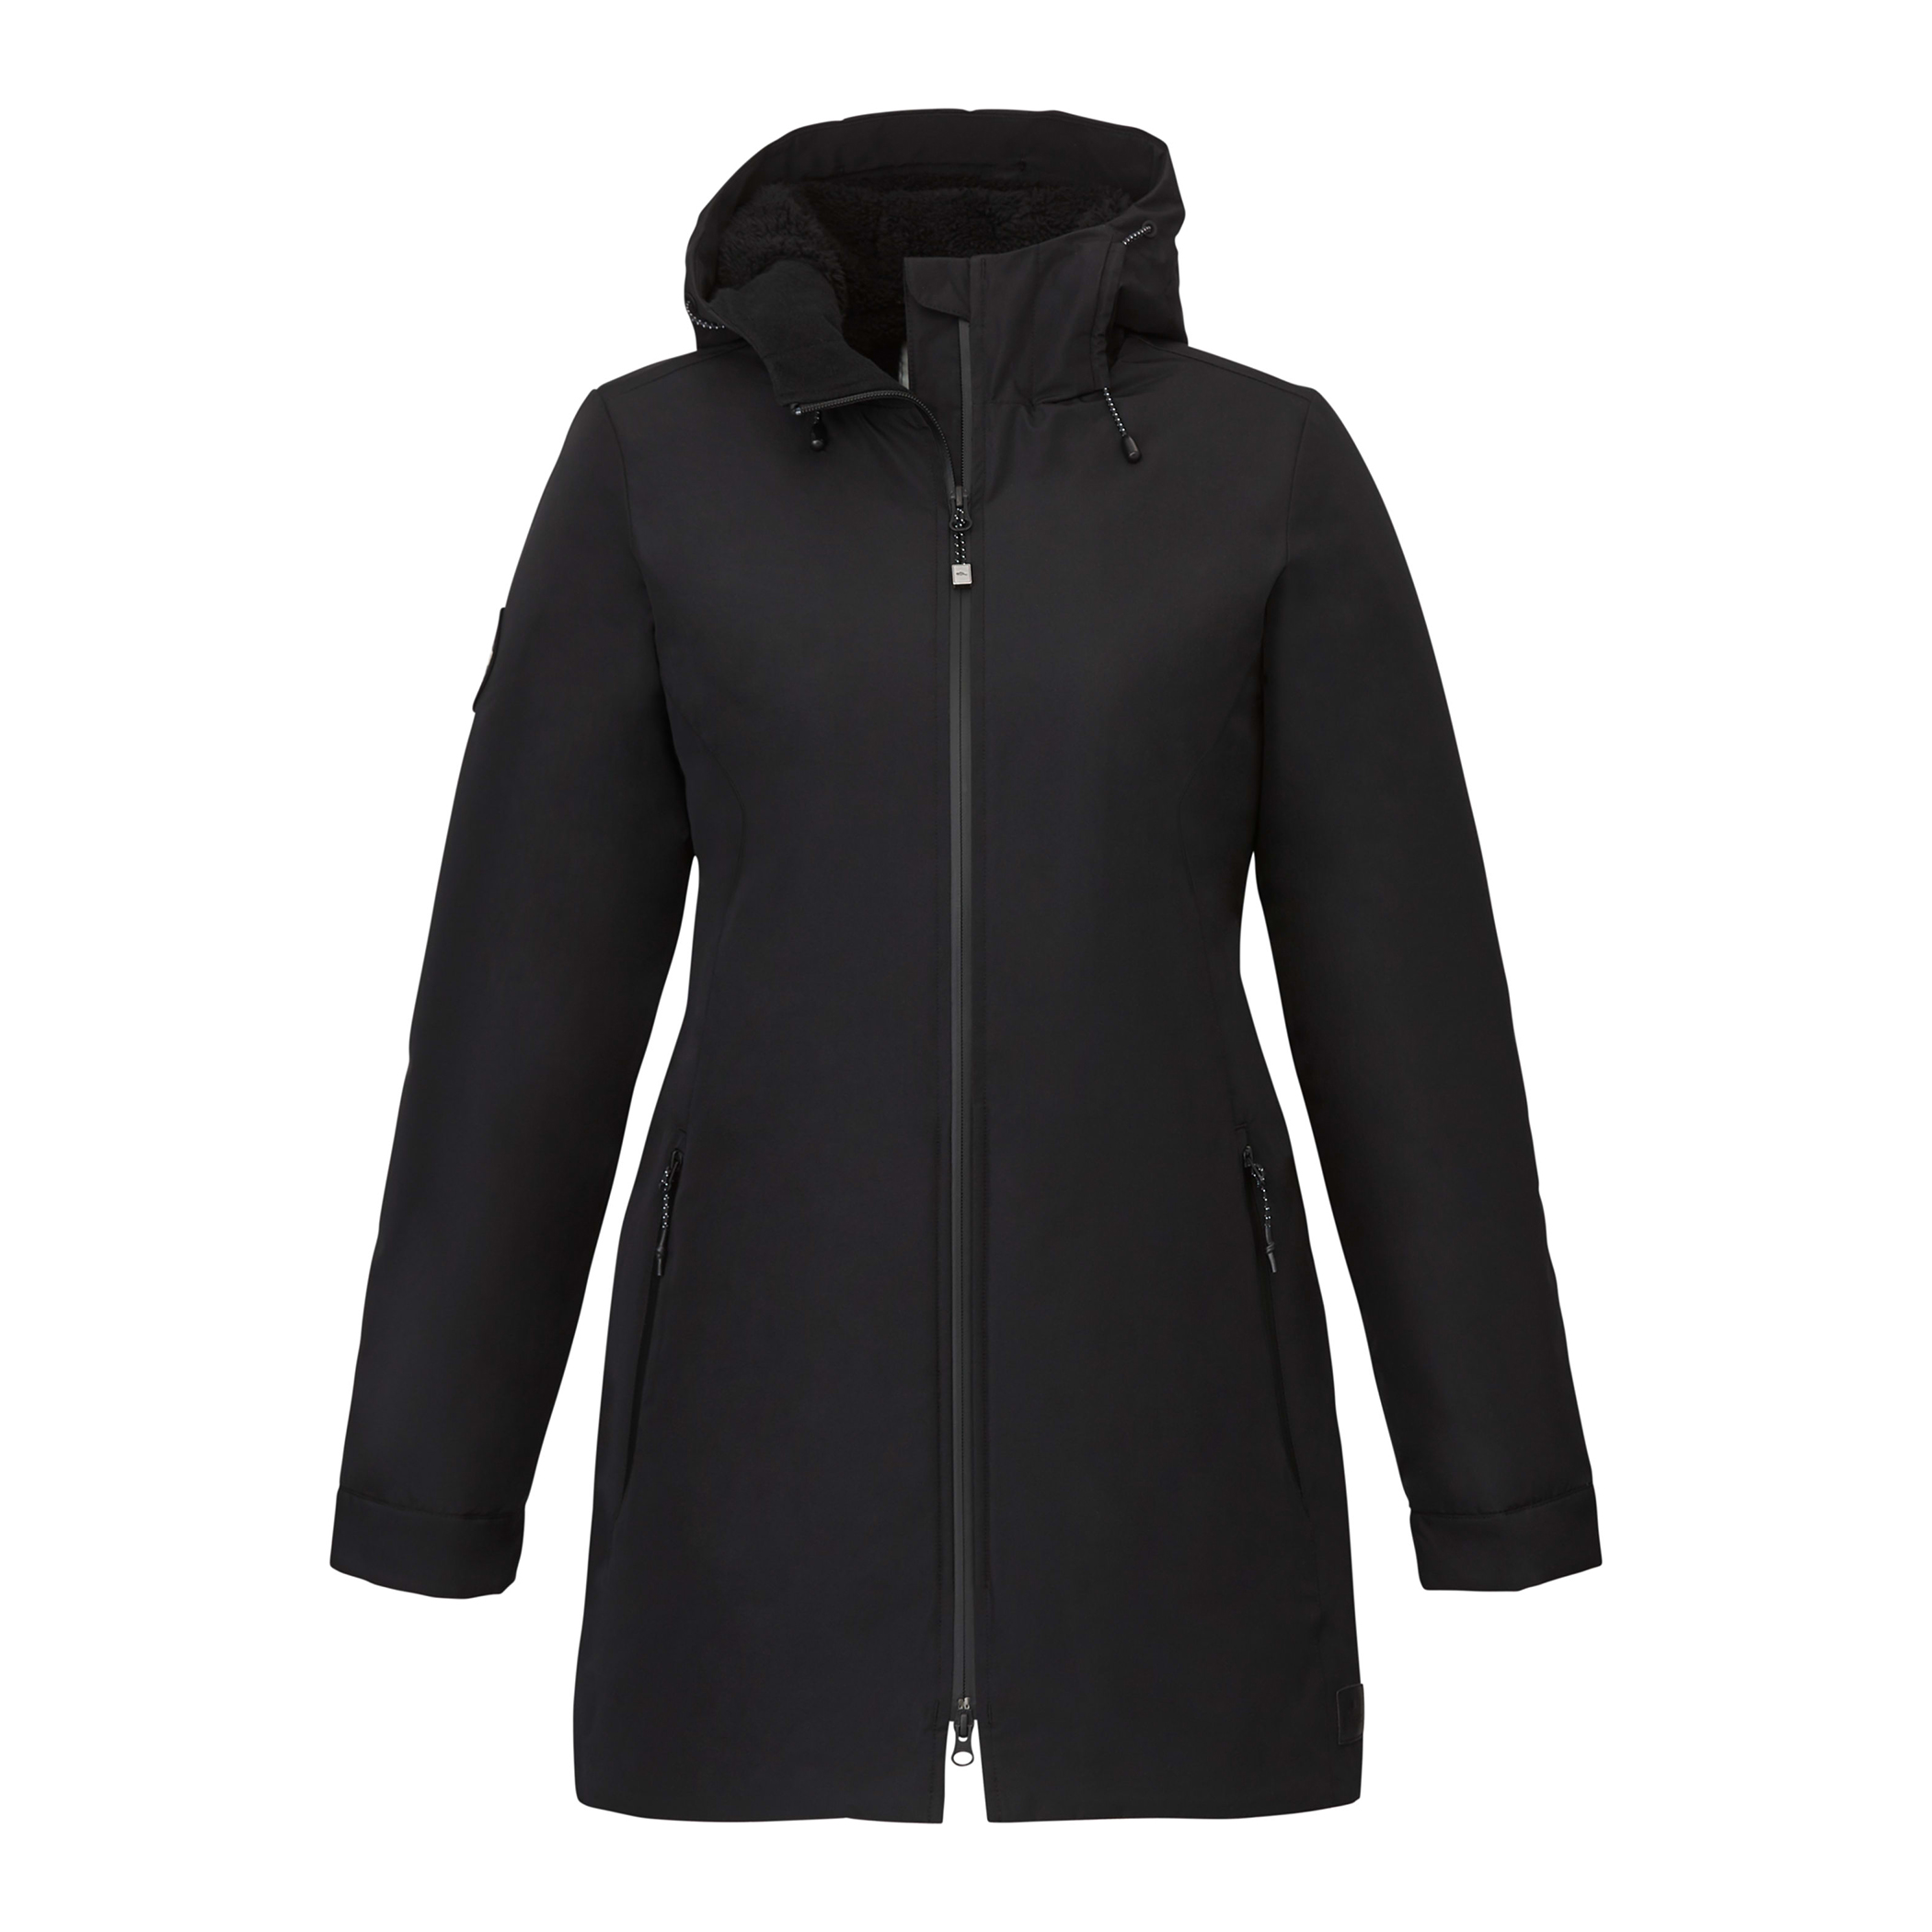 Roots73 ROCKGLEN Eco Insulated | Trimark Sportswear